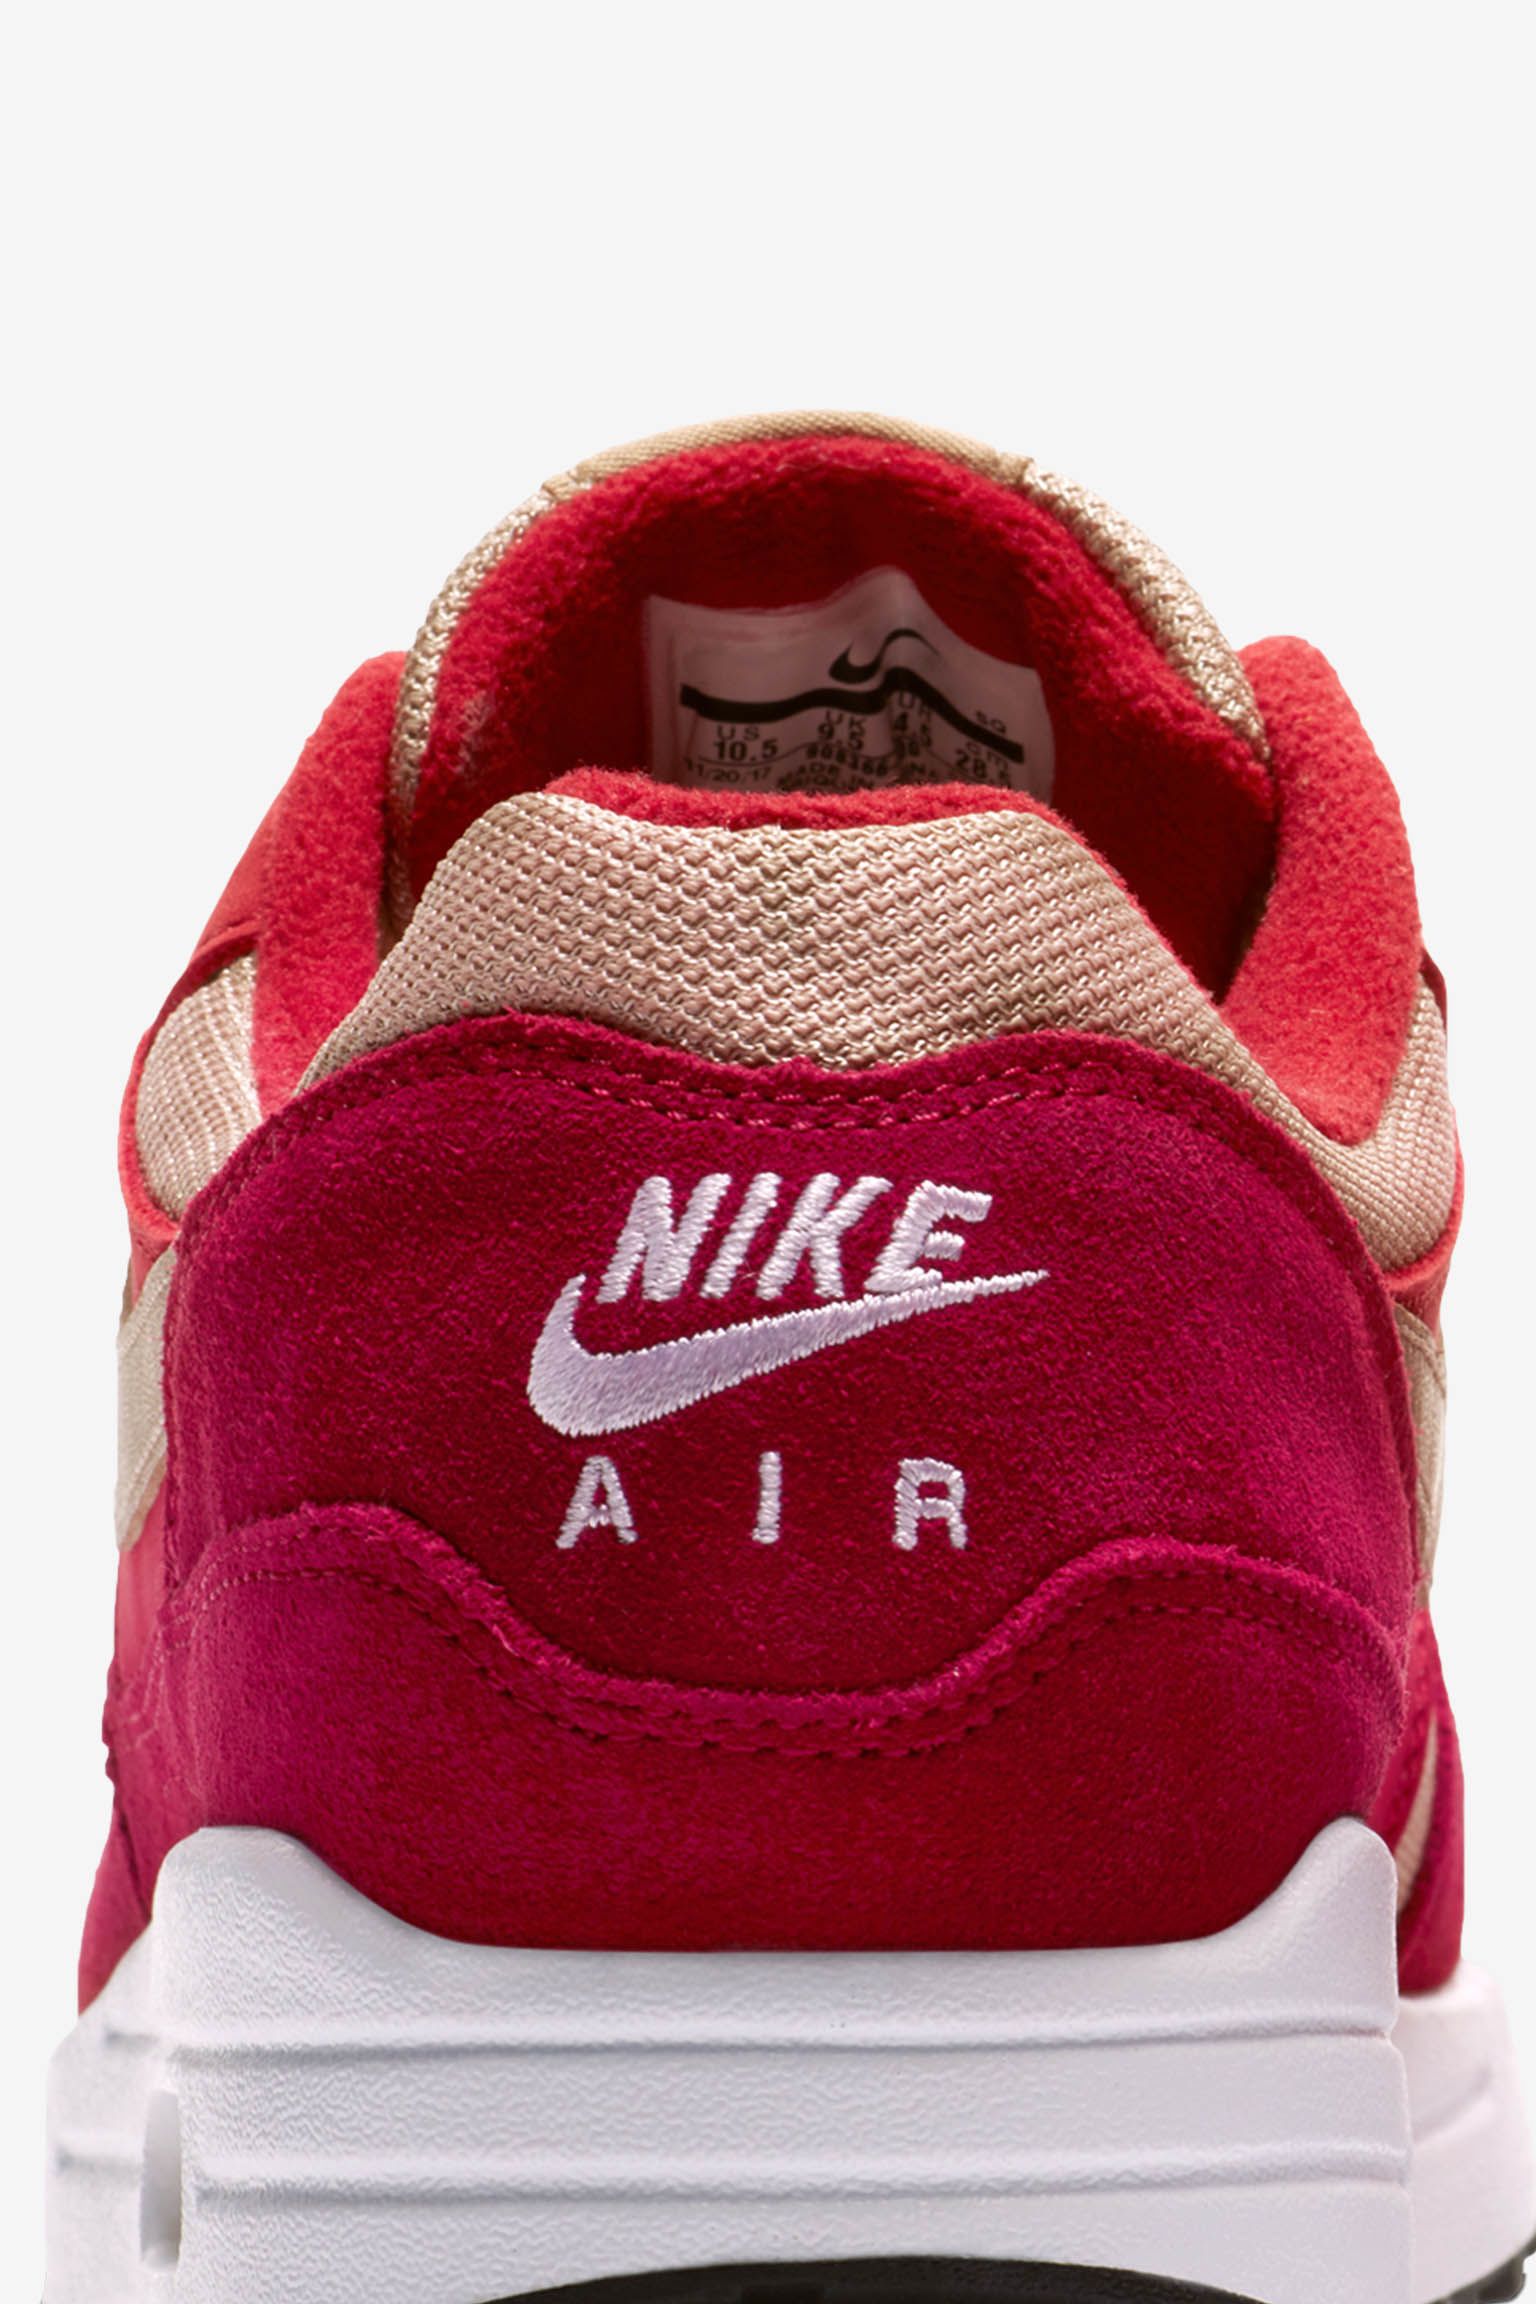 cerca Manuscrito superstición NIKE公式】ナイキ エアマックス 1 プレミアム レトロ 'Red Curry' (908366-600 / AM1). Nike SNKRS JP